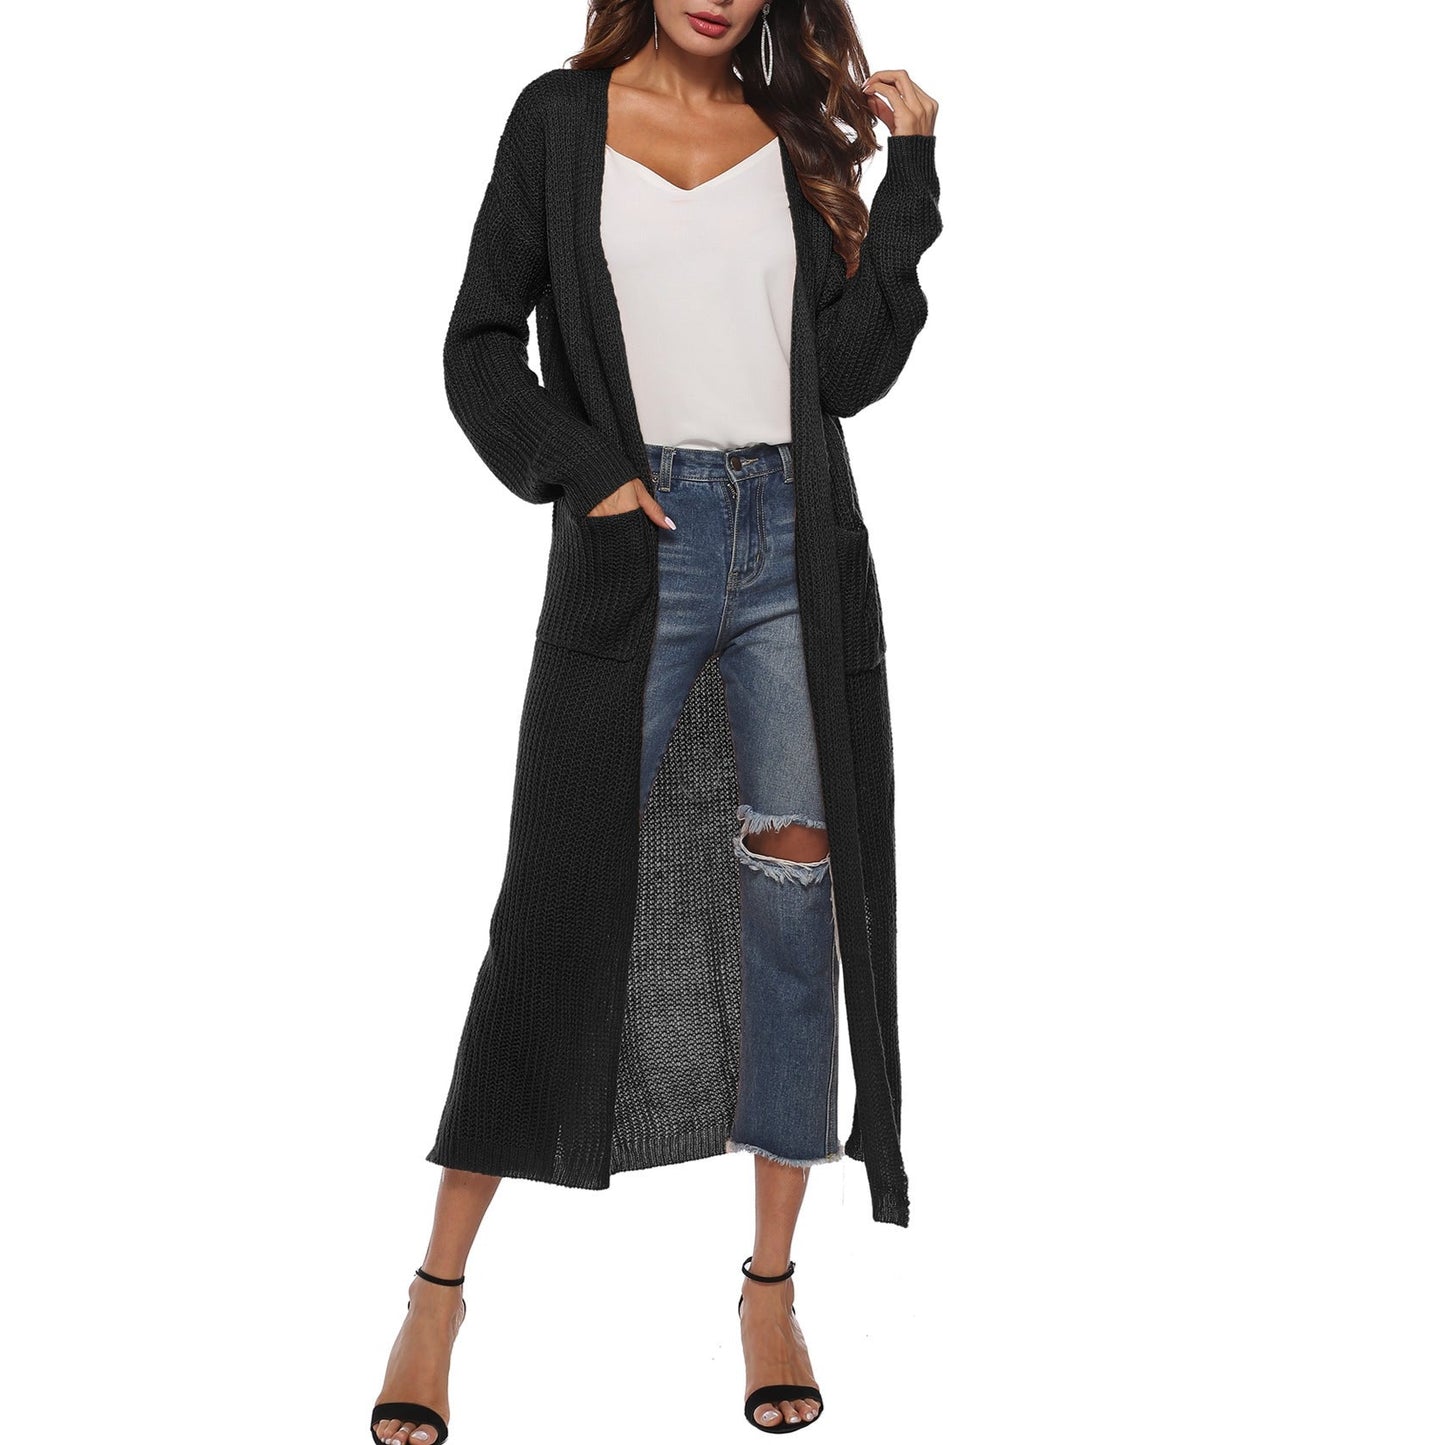 Women's Cardigan Sweater With Large Pockets Cardigan Sweater Long Thin Coat